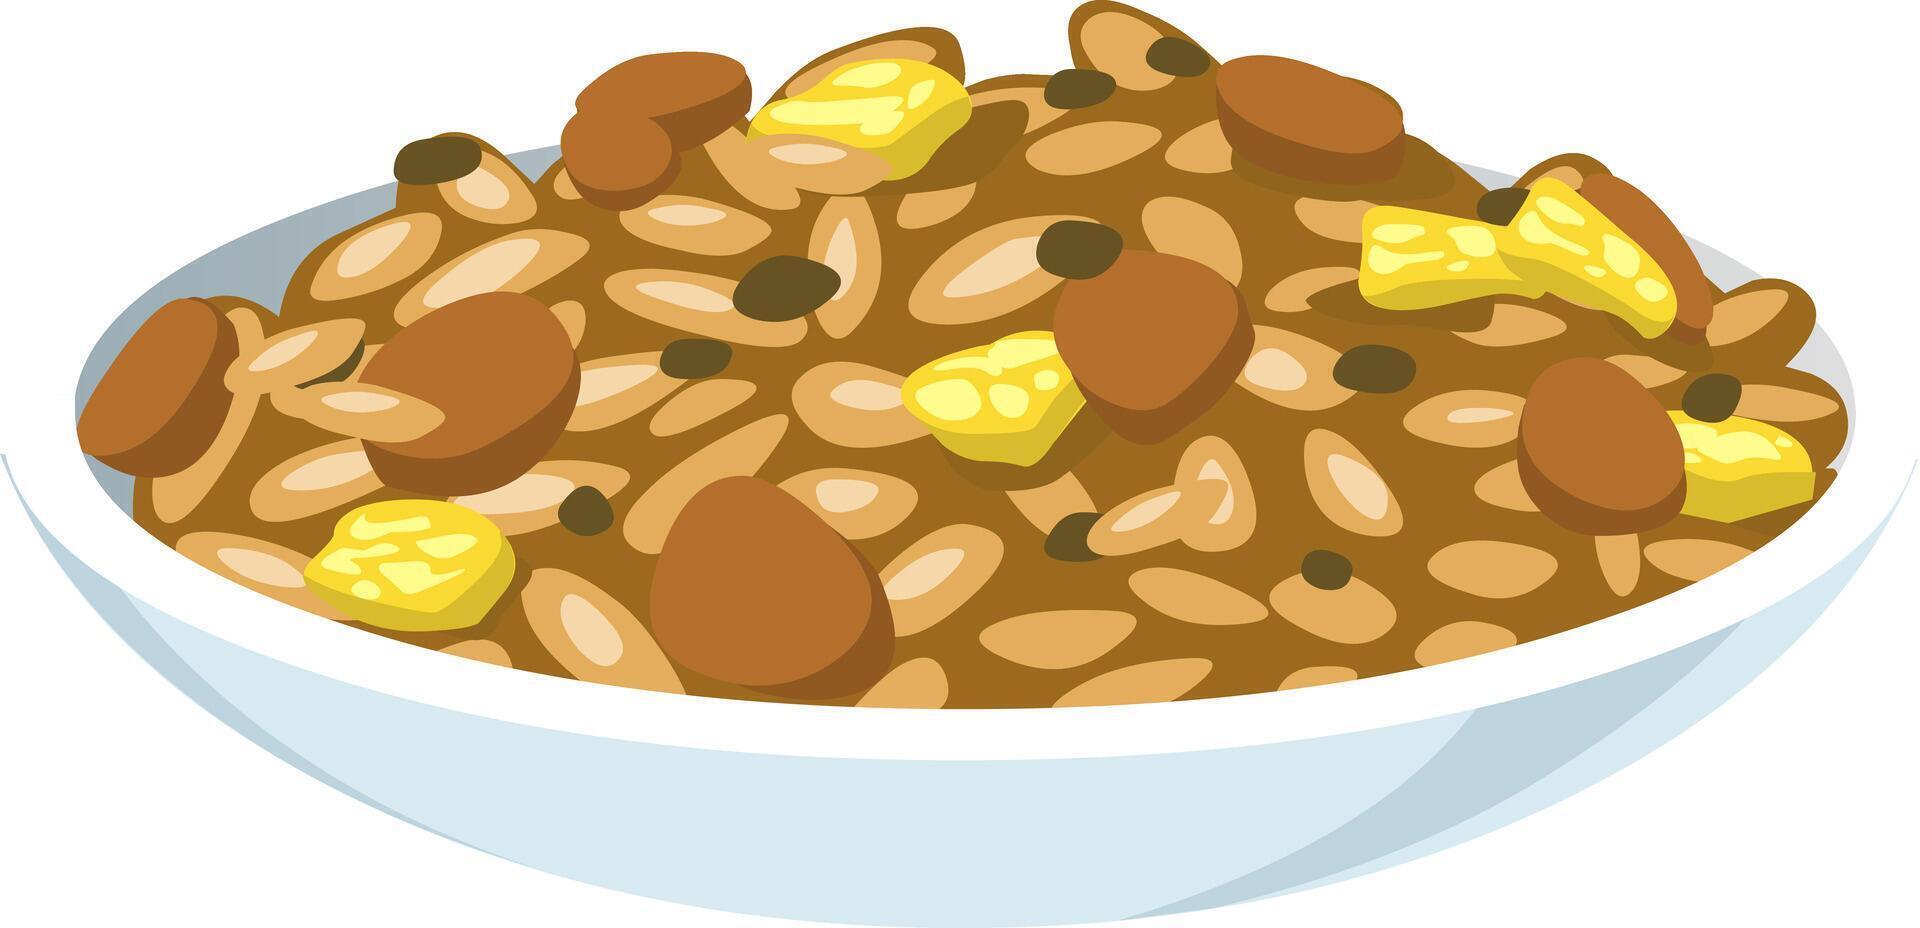 Illustration of a bowl of oatmeal with raisins and nuts vector